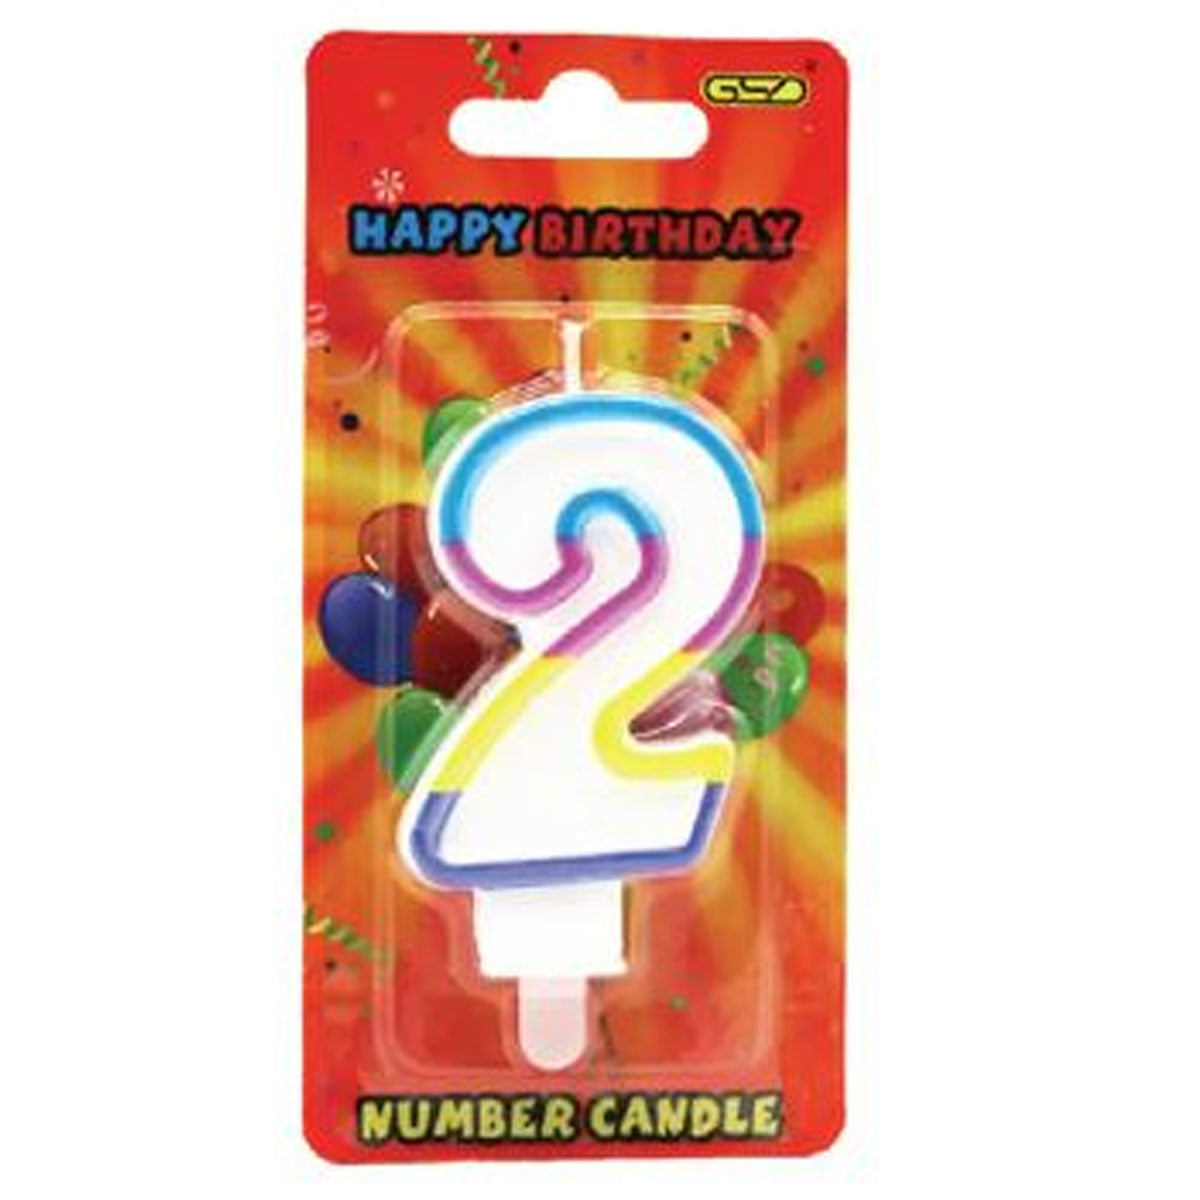 Happy birthday GSD - Number 2 Birthday Candle - 1pcs in a package.